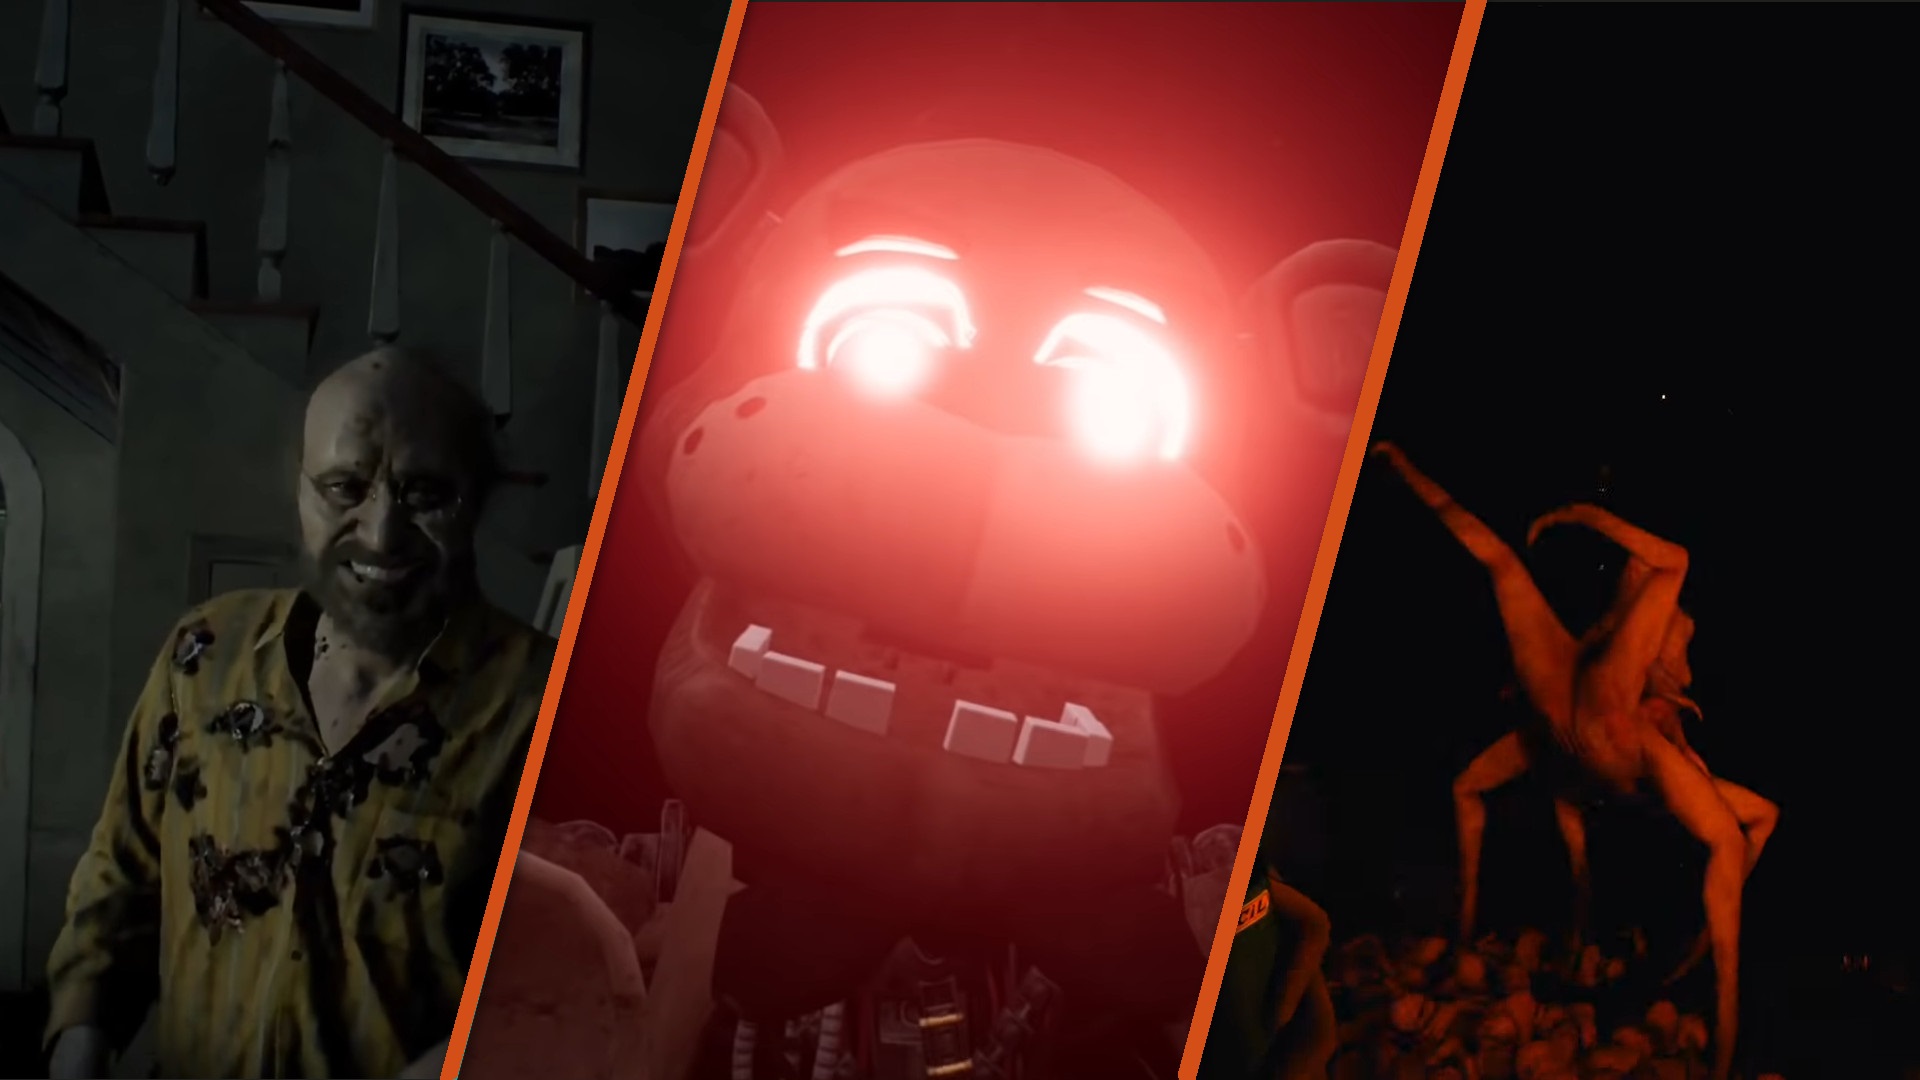 Five Nights at Freddy's VR: Help Wanted FULL GAME Minecraft Map